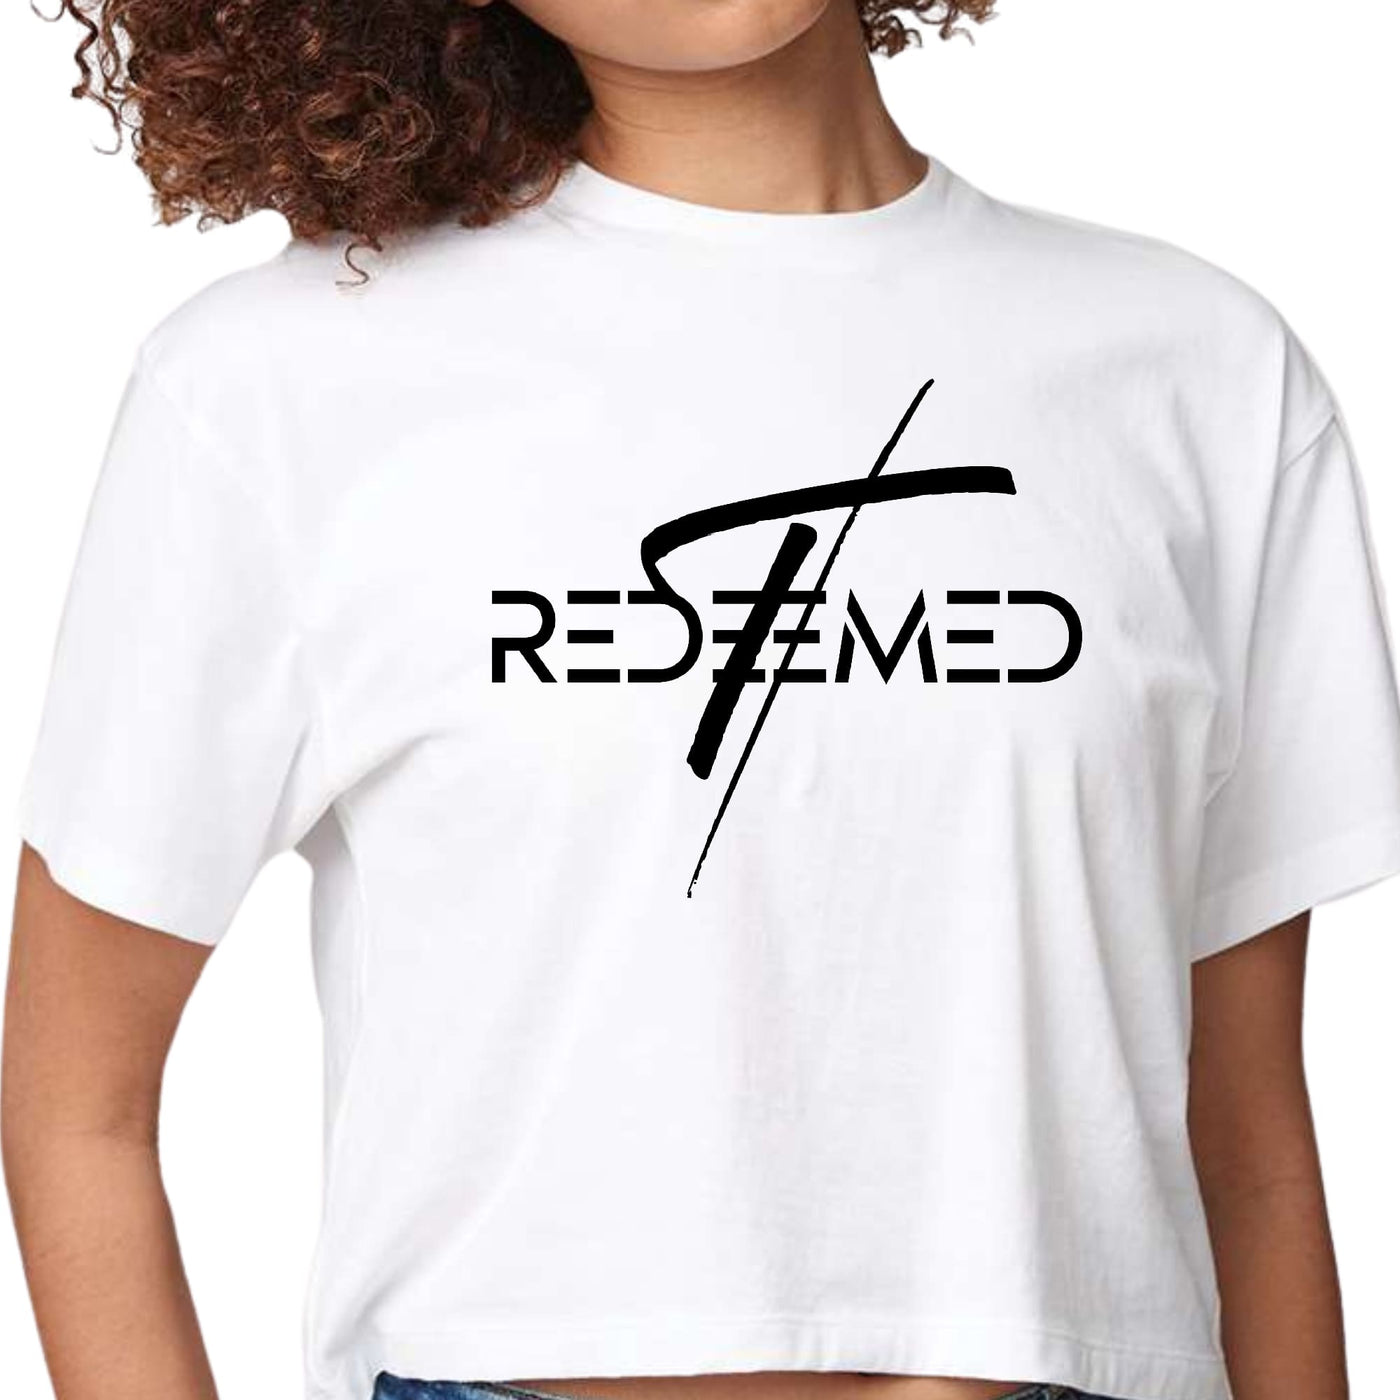 Womens Cropped Graphic T-shirt Redeemed Cross Black Illustration - Womens